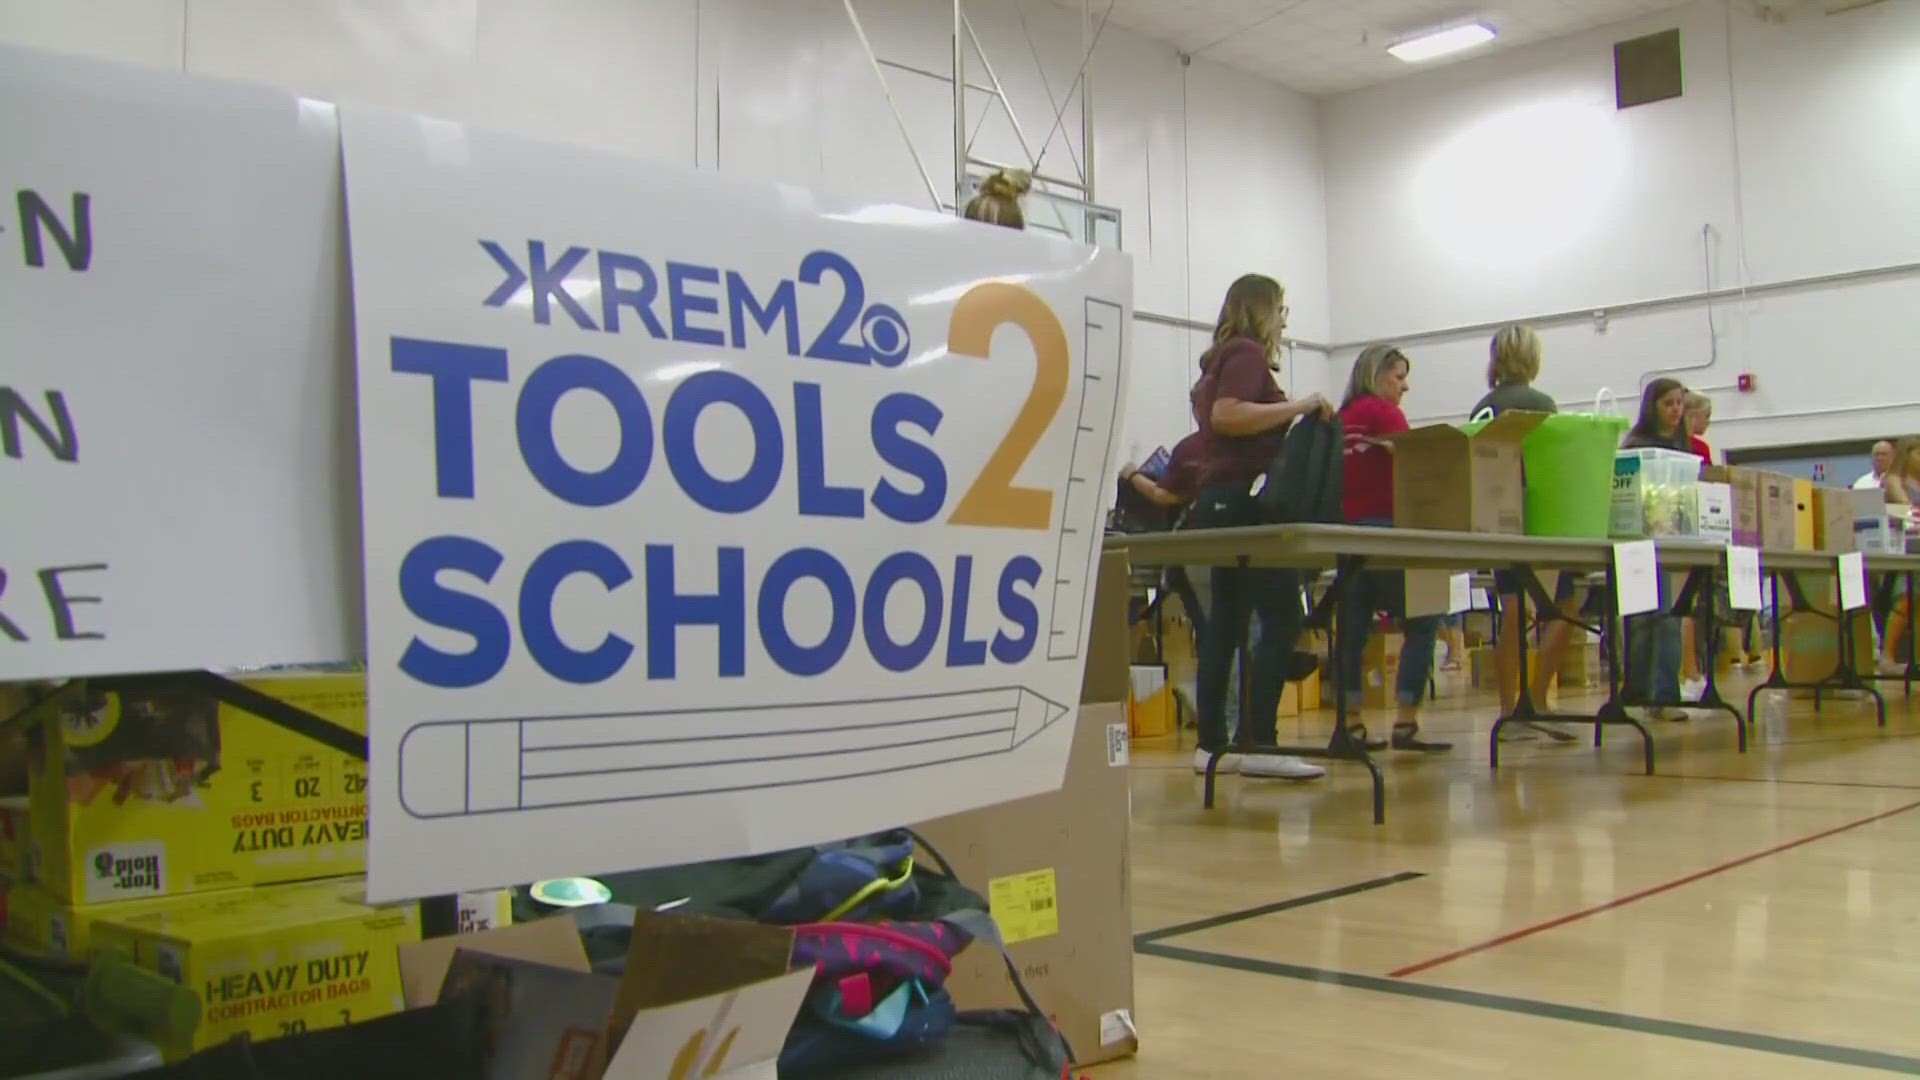 Tools 2 Schools is an effort to make sure every kid in the Inland Northwest has the supplies needed to thrive in school.